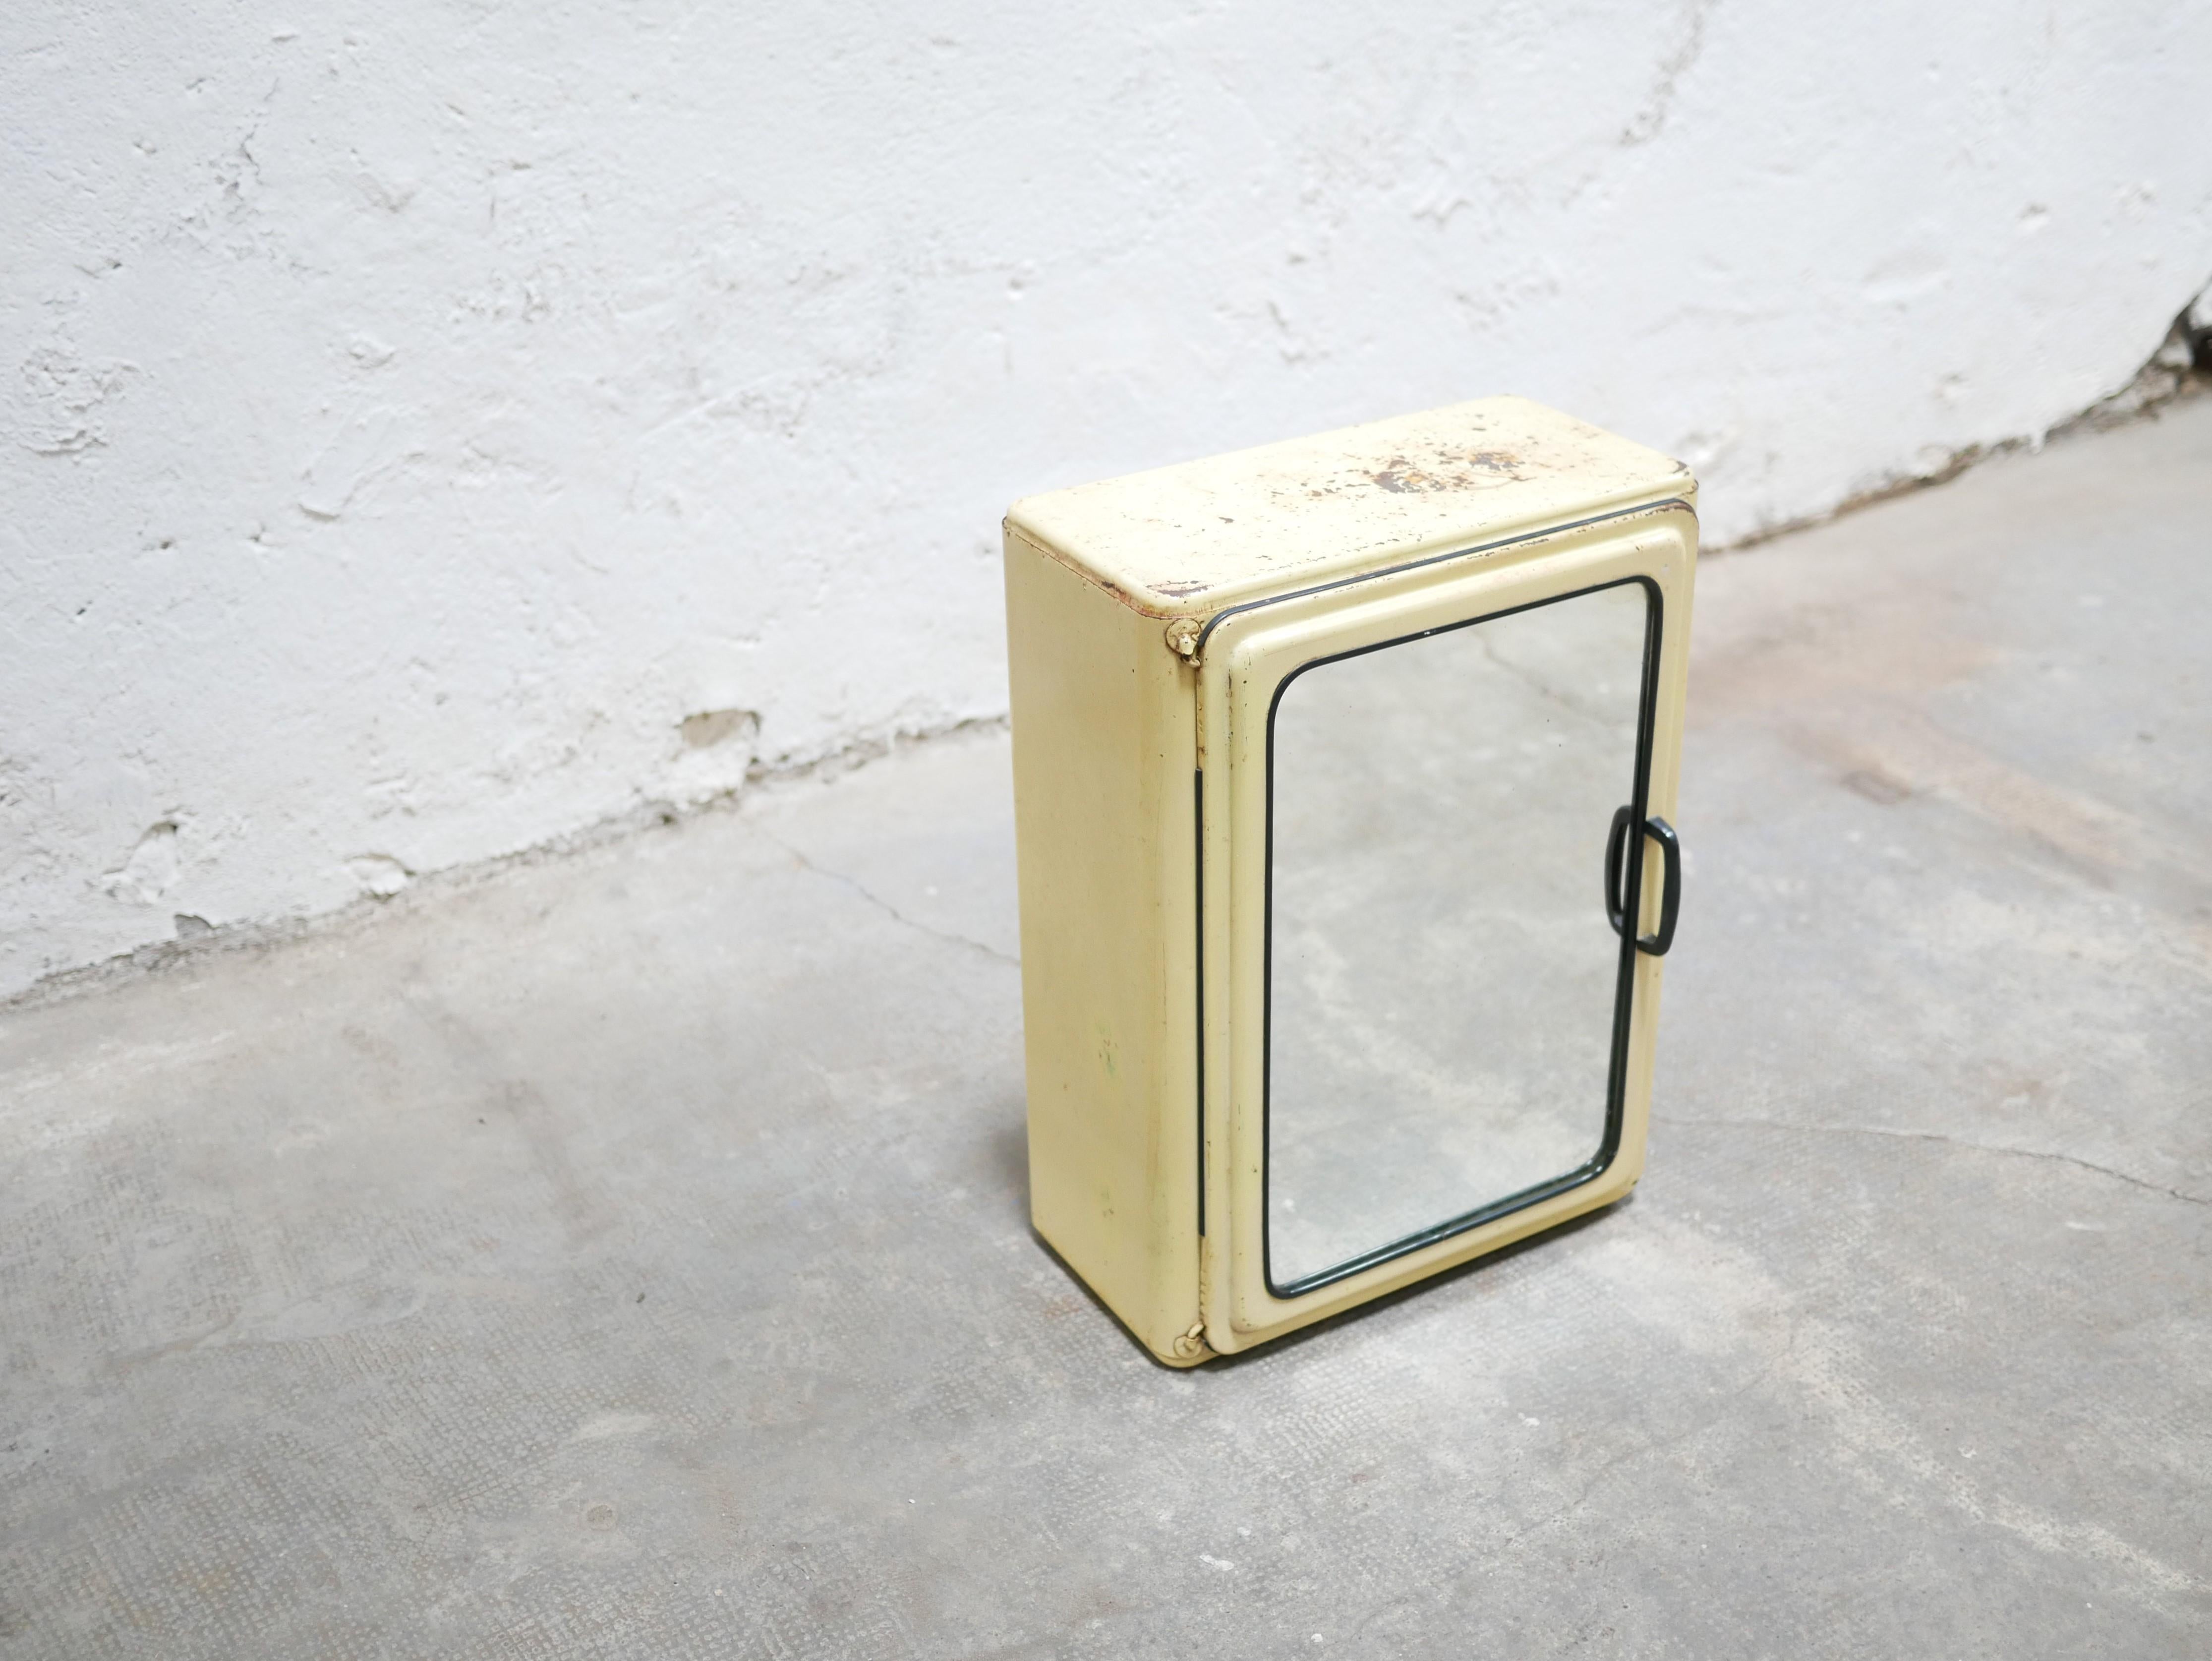 Medicine cabinet in yellow metal from the 1950s.

This small medicine cabinet is not lacking in charm and character.
We love its resolutely vintage lines, its luminous and soft hue and its small size which allows it to fit in anywhere.

Beautiful